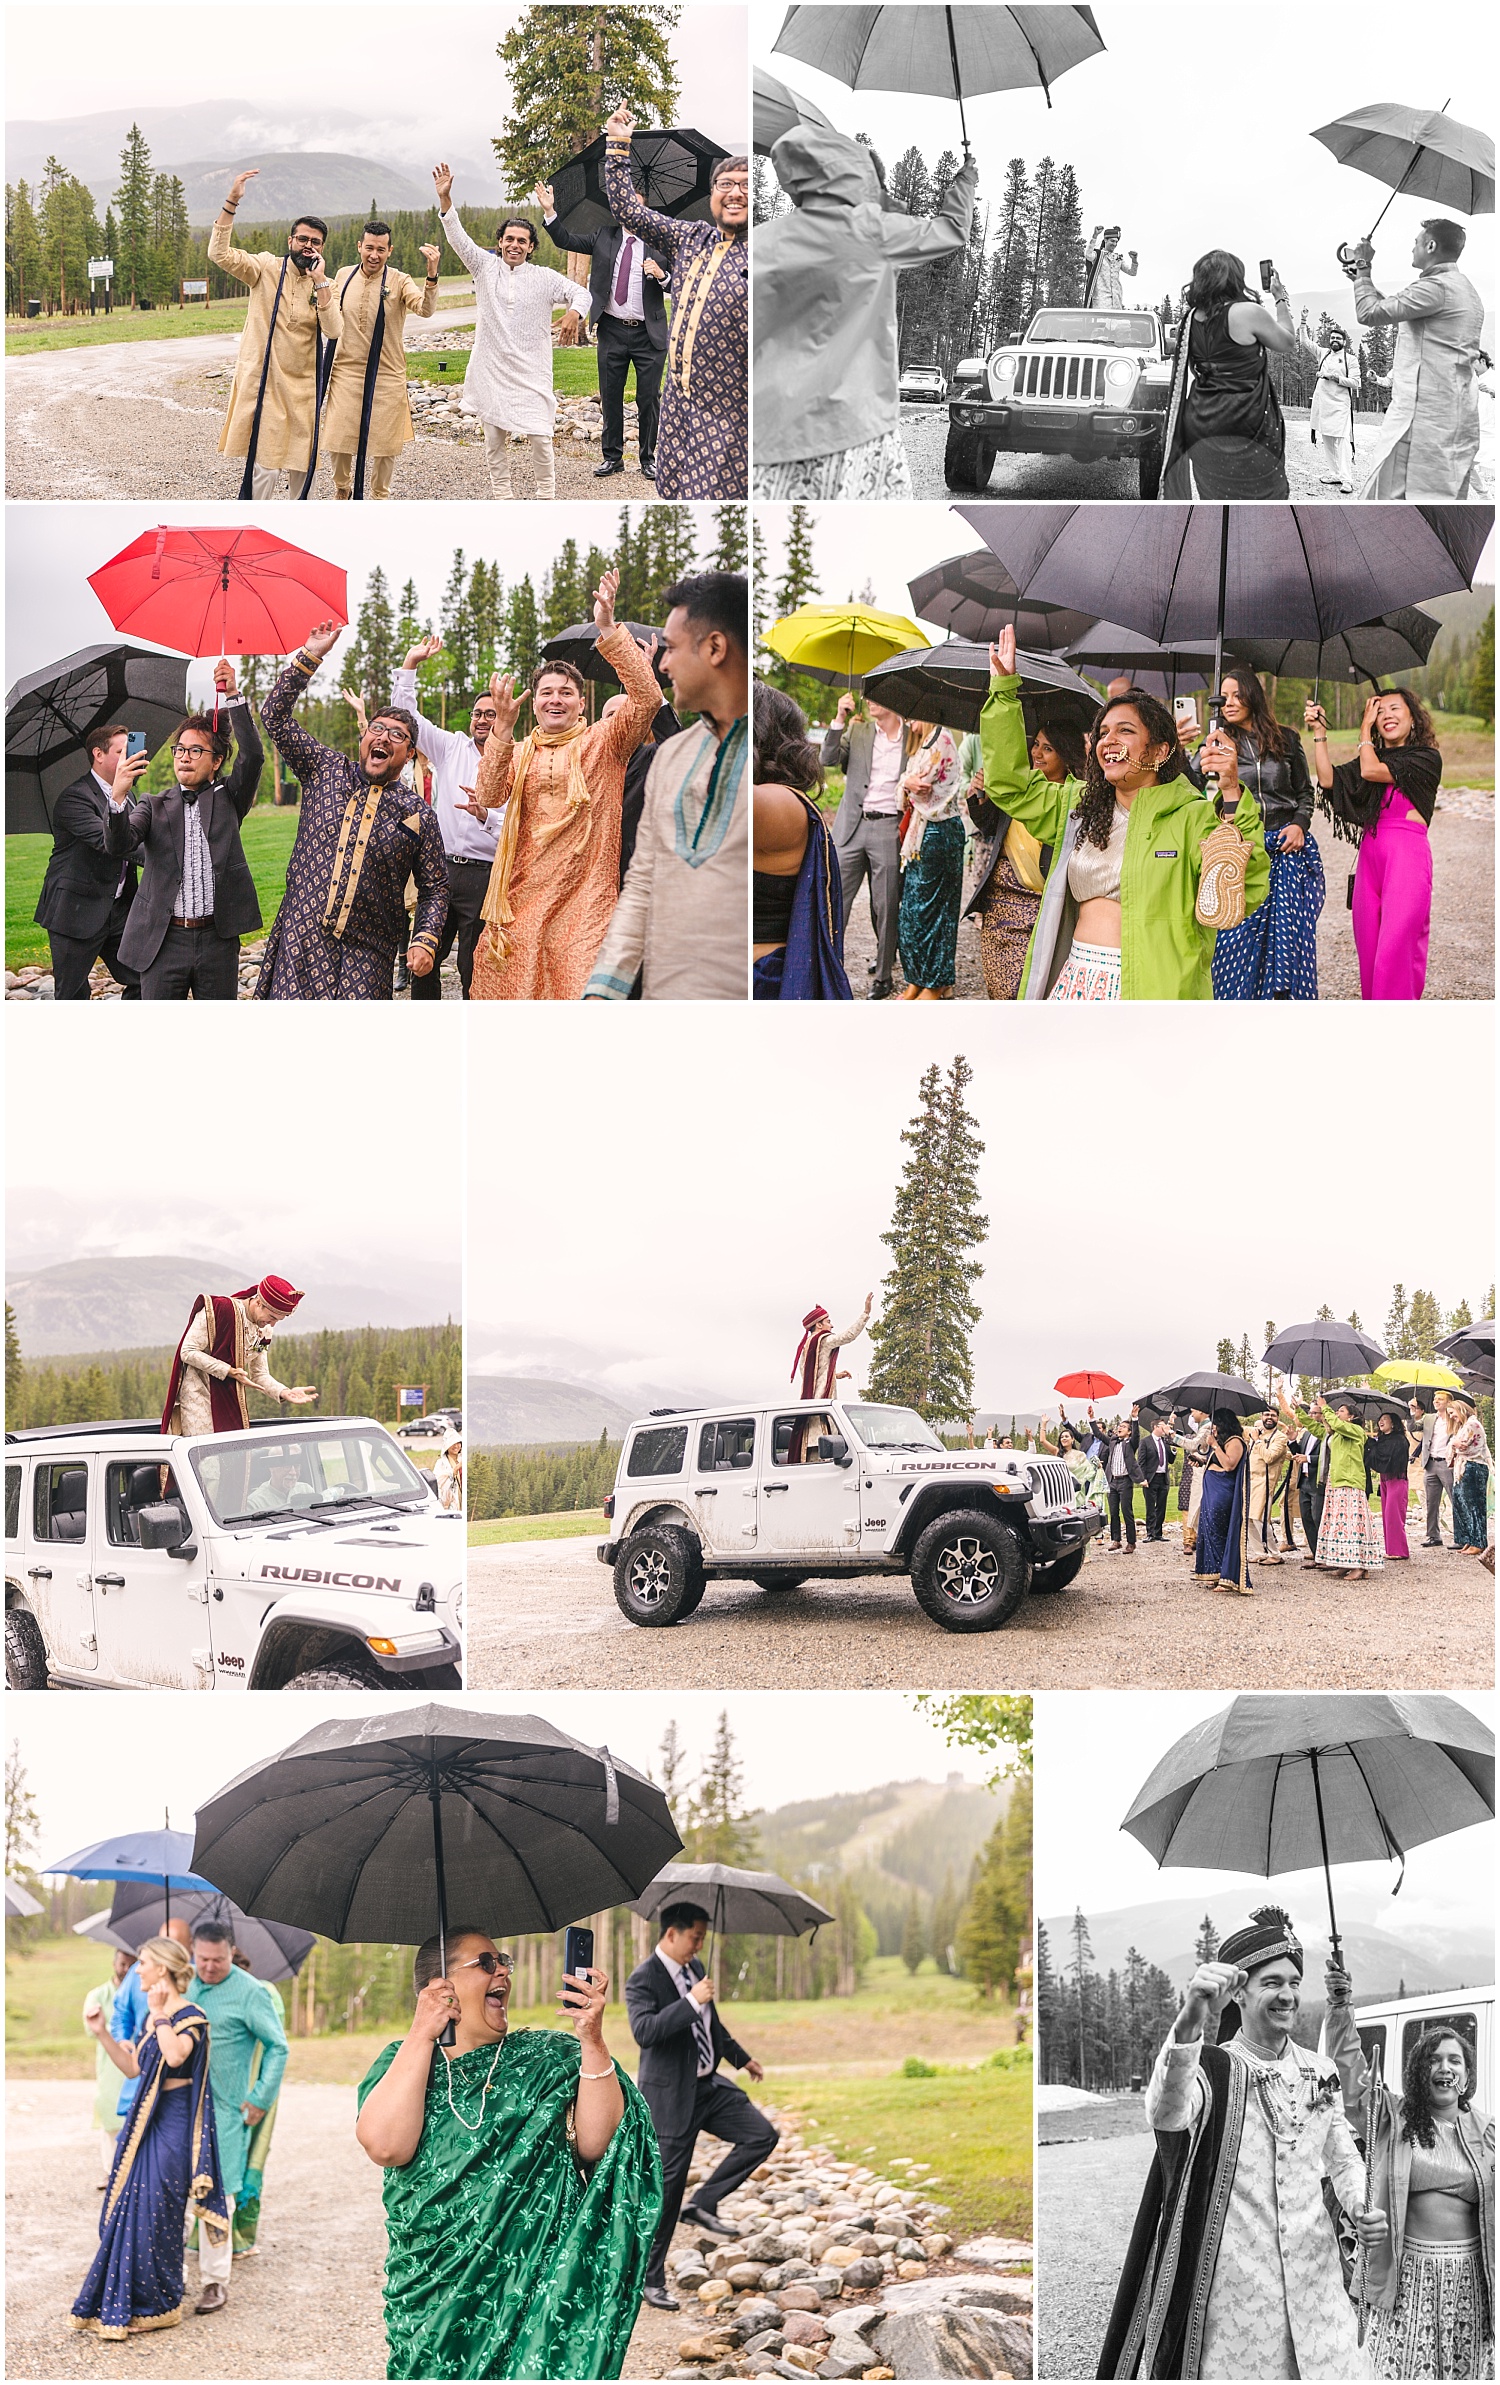 Groom's baraat processional in the rain at Indian wedding at Ten Mile Station in Breckenridge Colorado